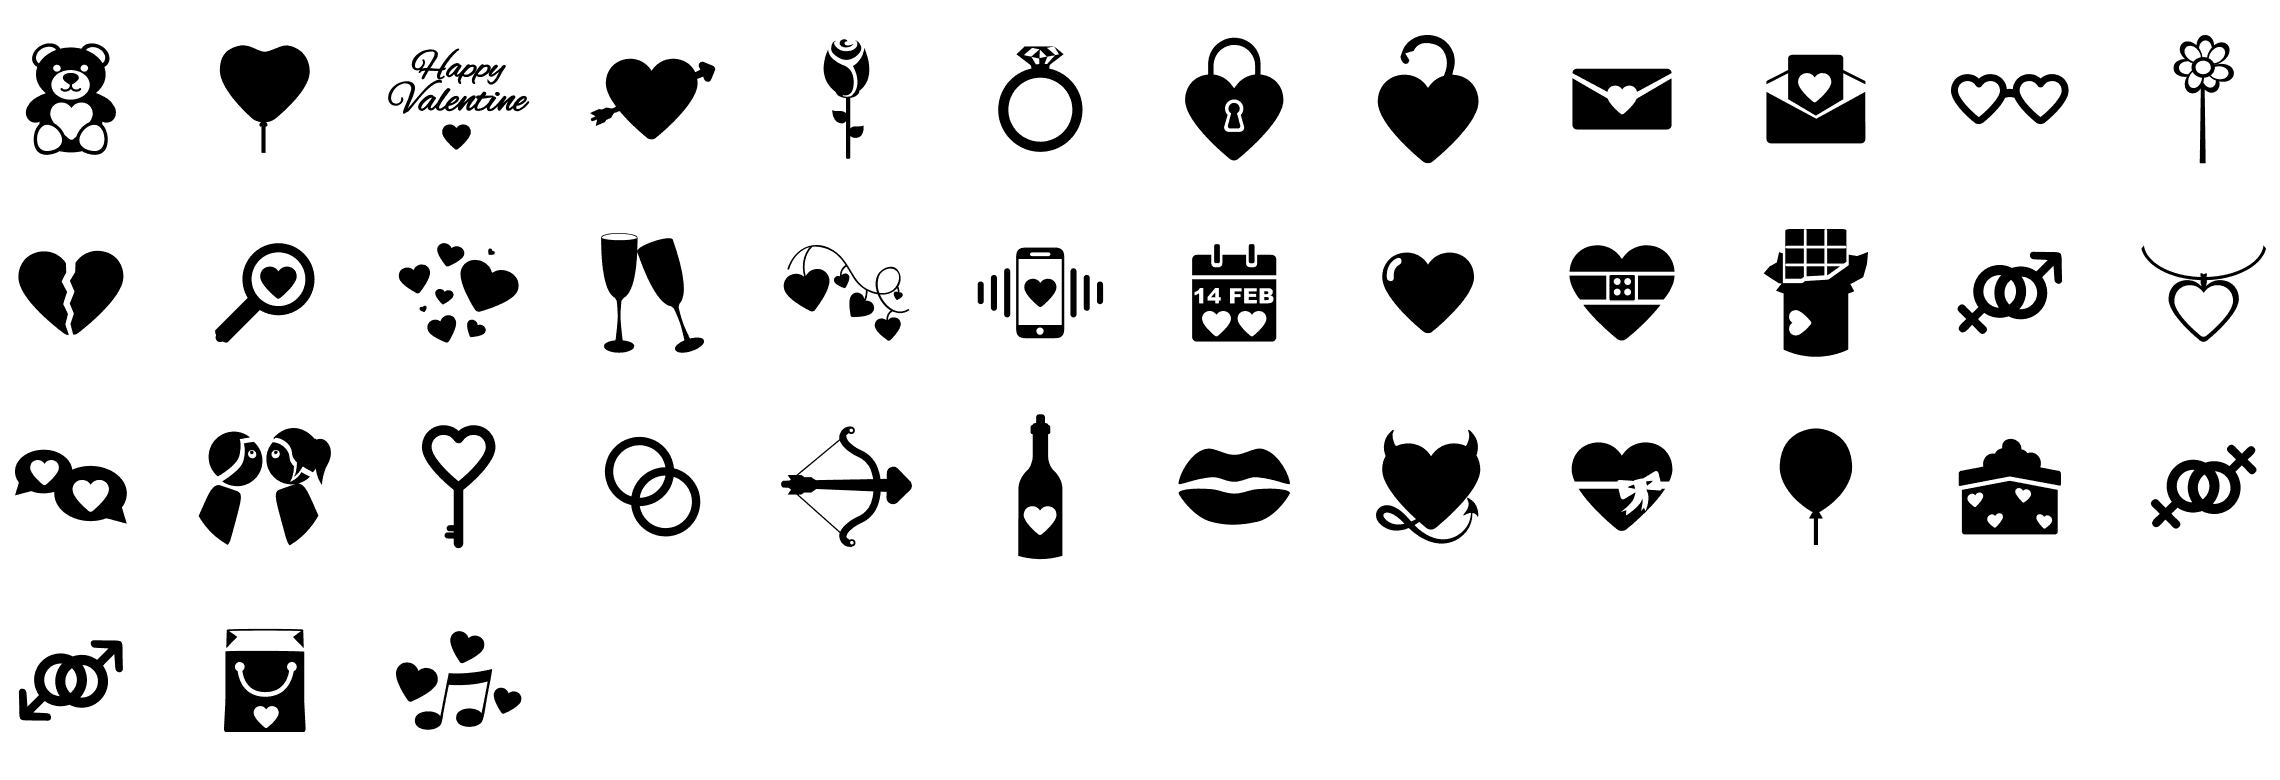 valentine-glyph-icons-preview